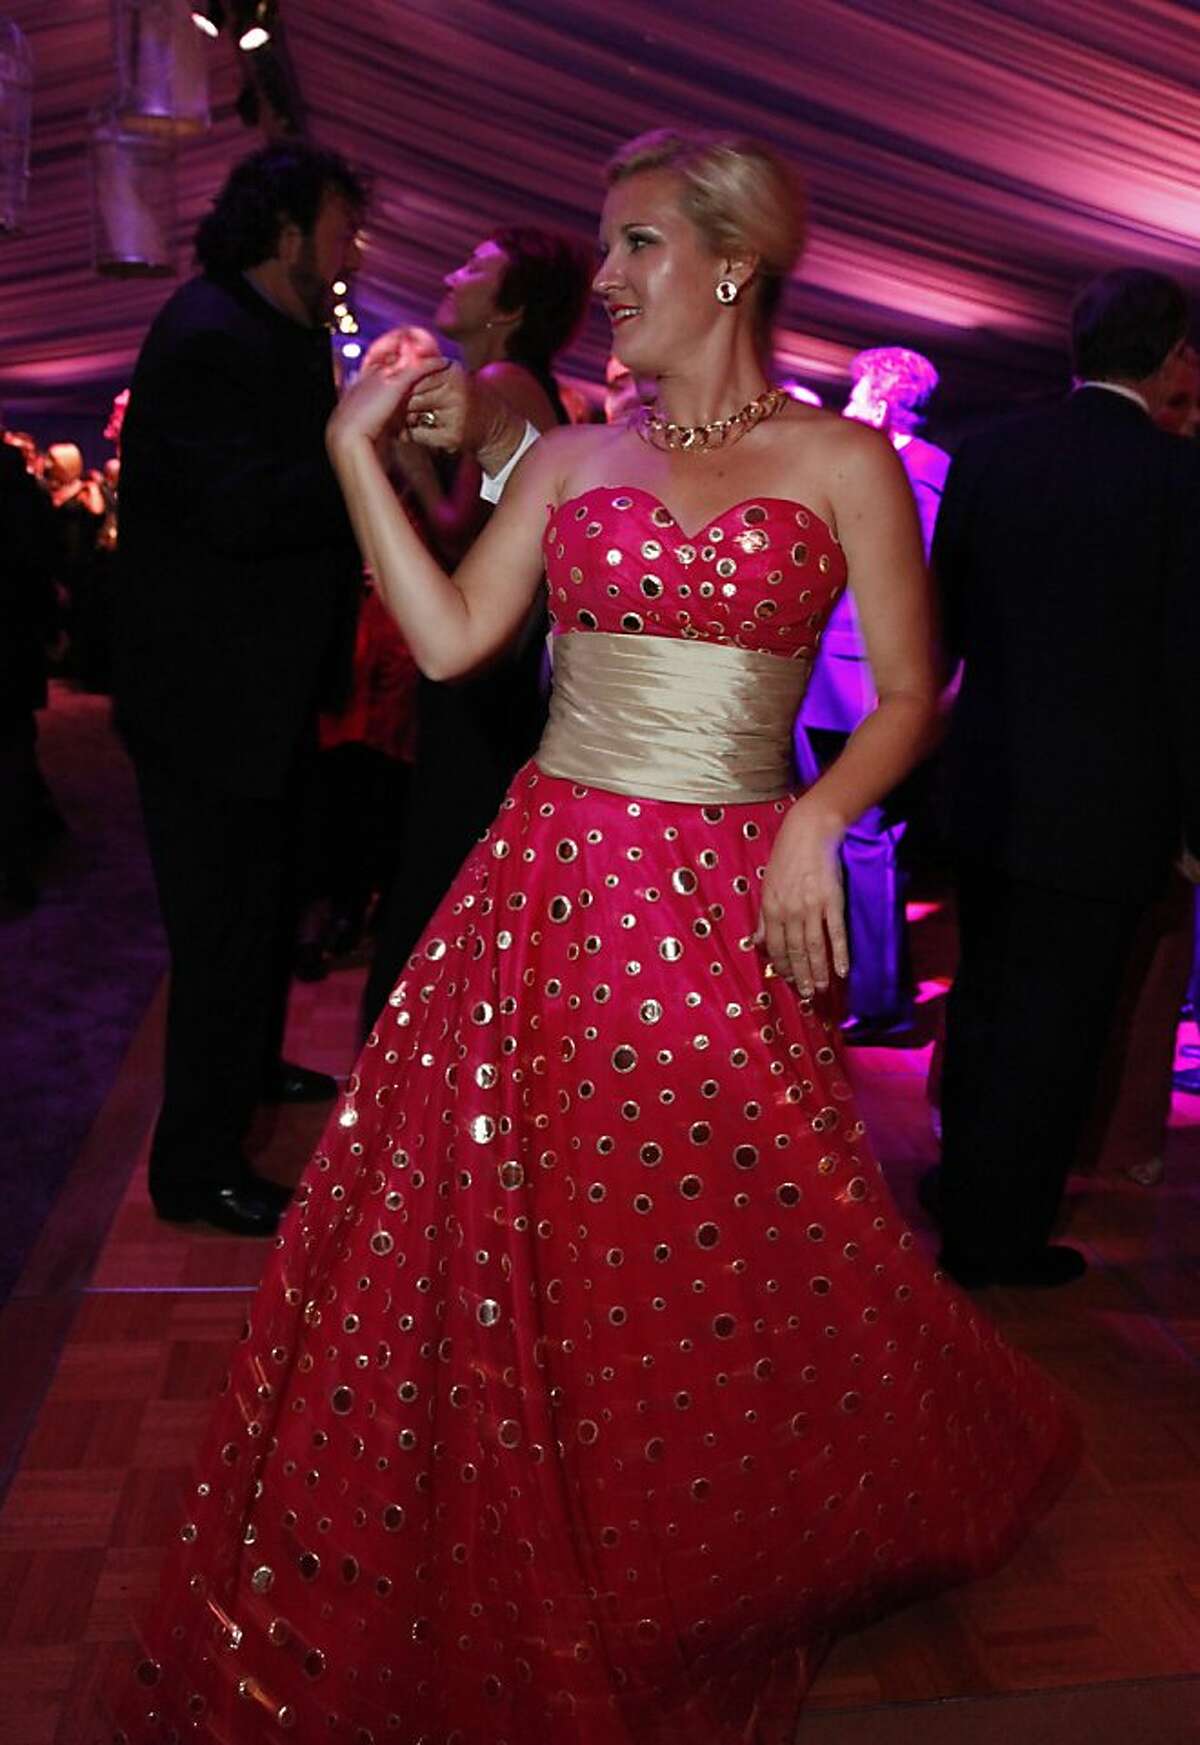 Danielle Mott dances during the after party of the San Francisco Opera's Opera Ball marking the beginning of its 90th season on Friday, Sept. 7, 2012. Those in attendance were entertained with Giuseppe Verdi?•s Rigoletto conducted by Music Director Nicola Luisotti for the season opener.